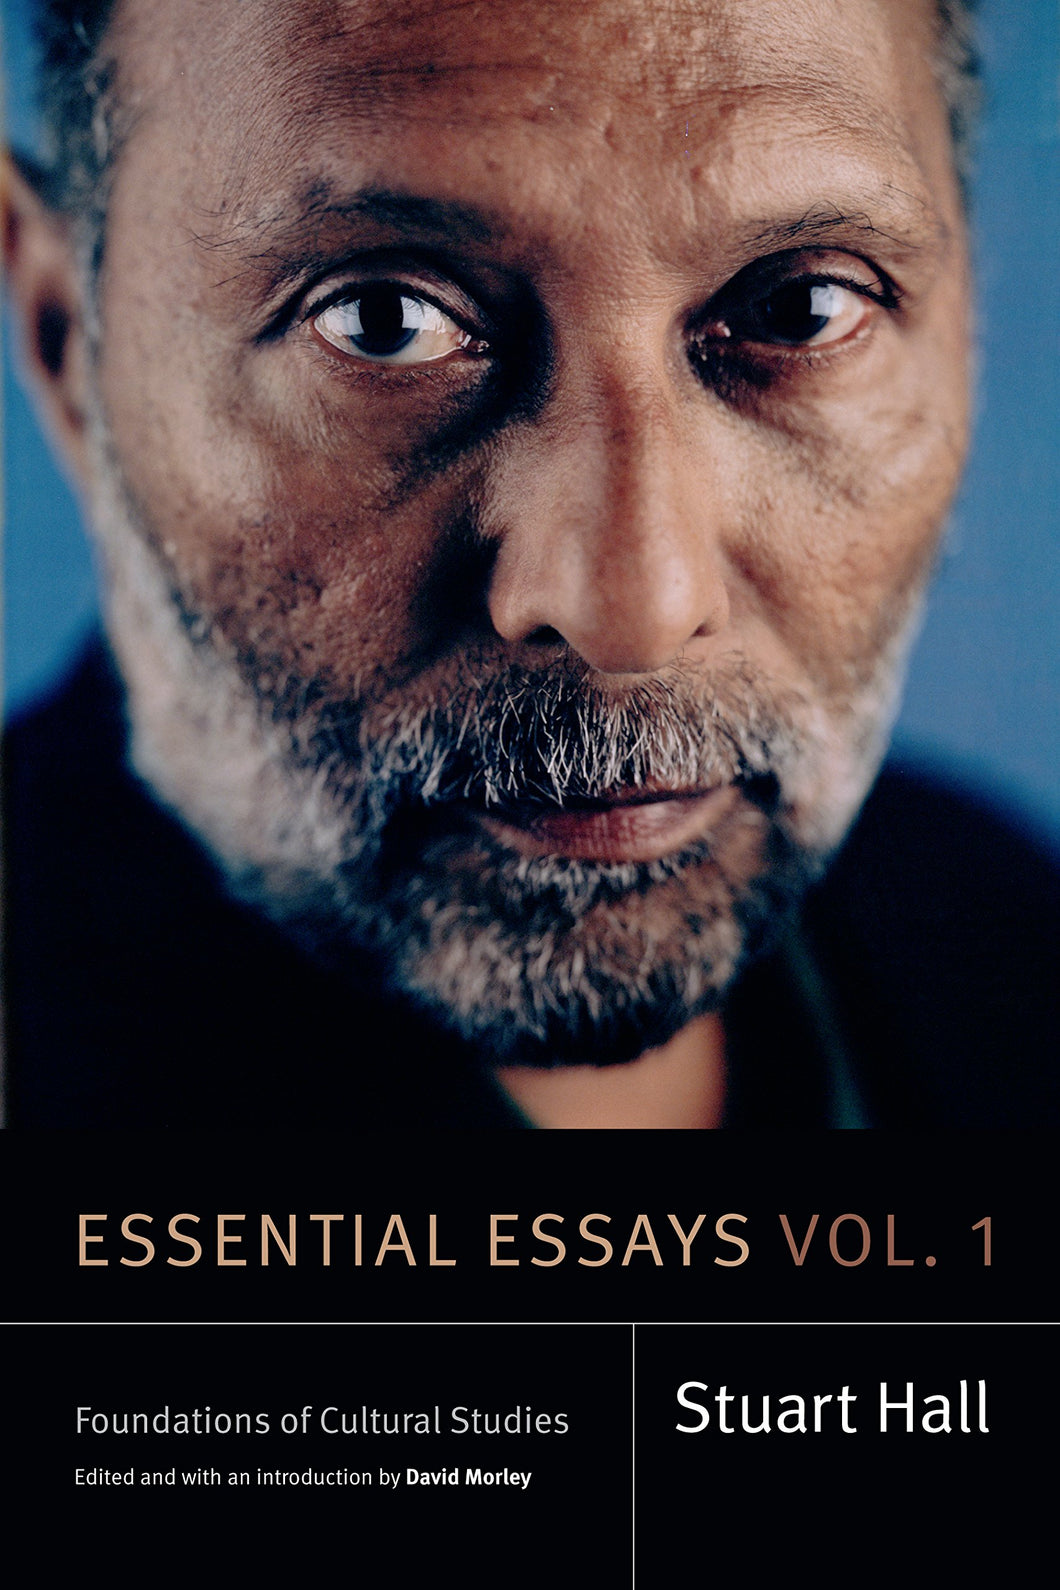 Essential Essays, Volume 1: Foundations of Cultural Studies by Stuart Hall